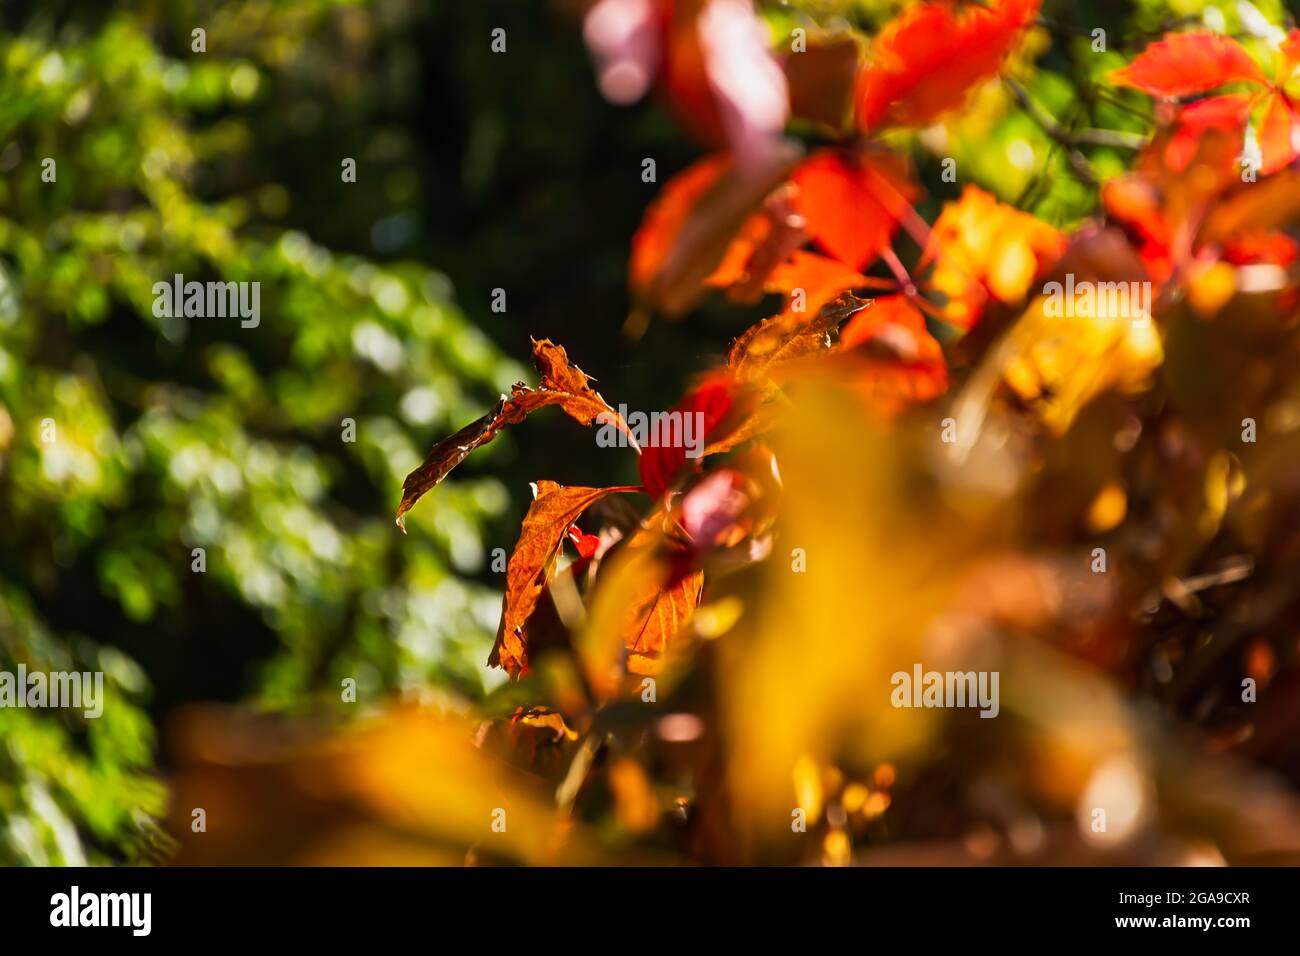 Autumn red brown leaves in soft focus on a blurry background. A full frame of colorful red-orange leaves. Warm sunlight. The background is a natural p Stock Photo